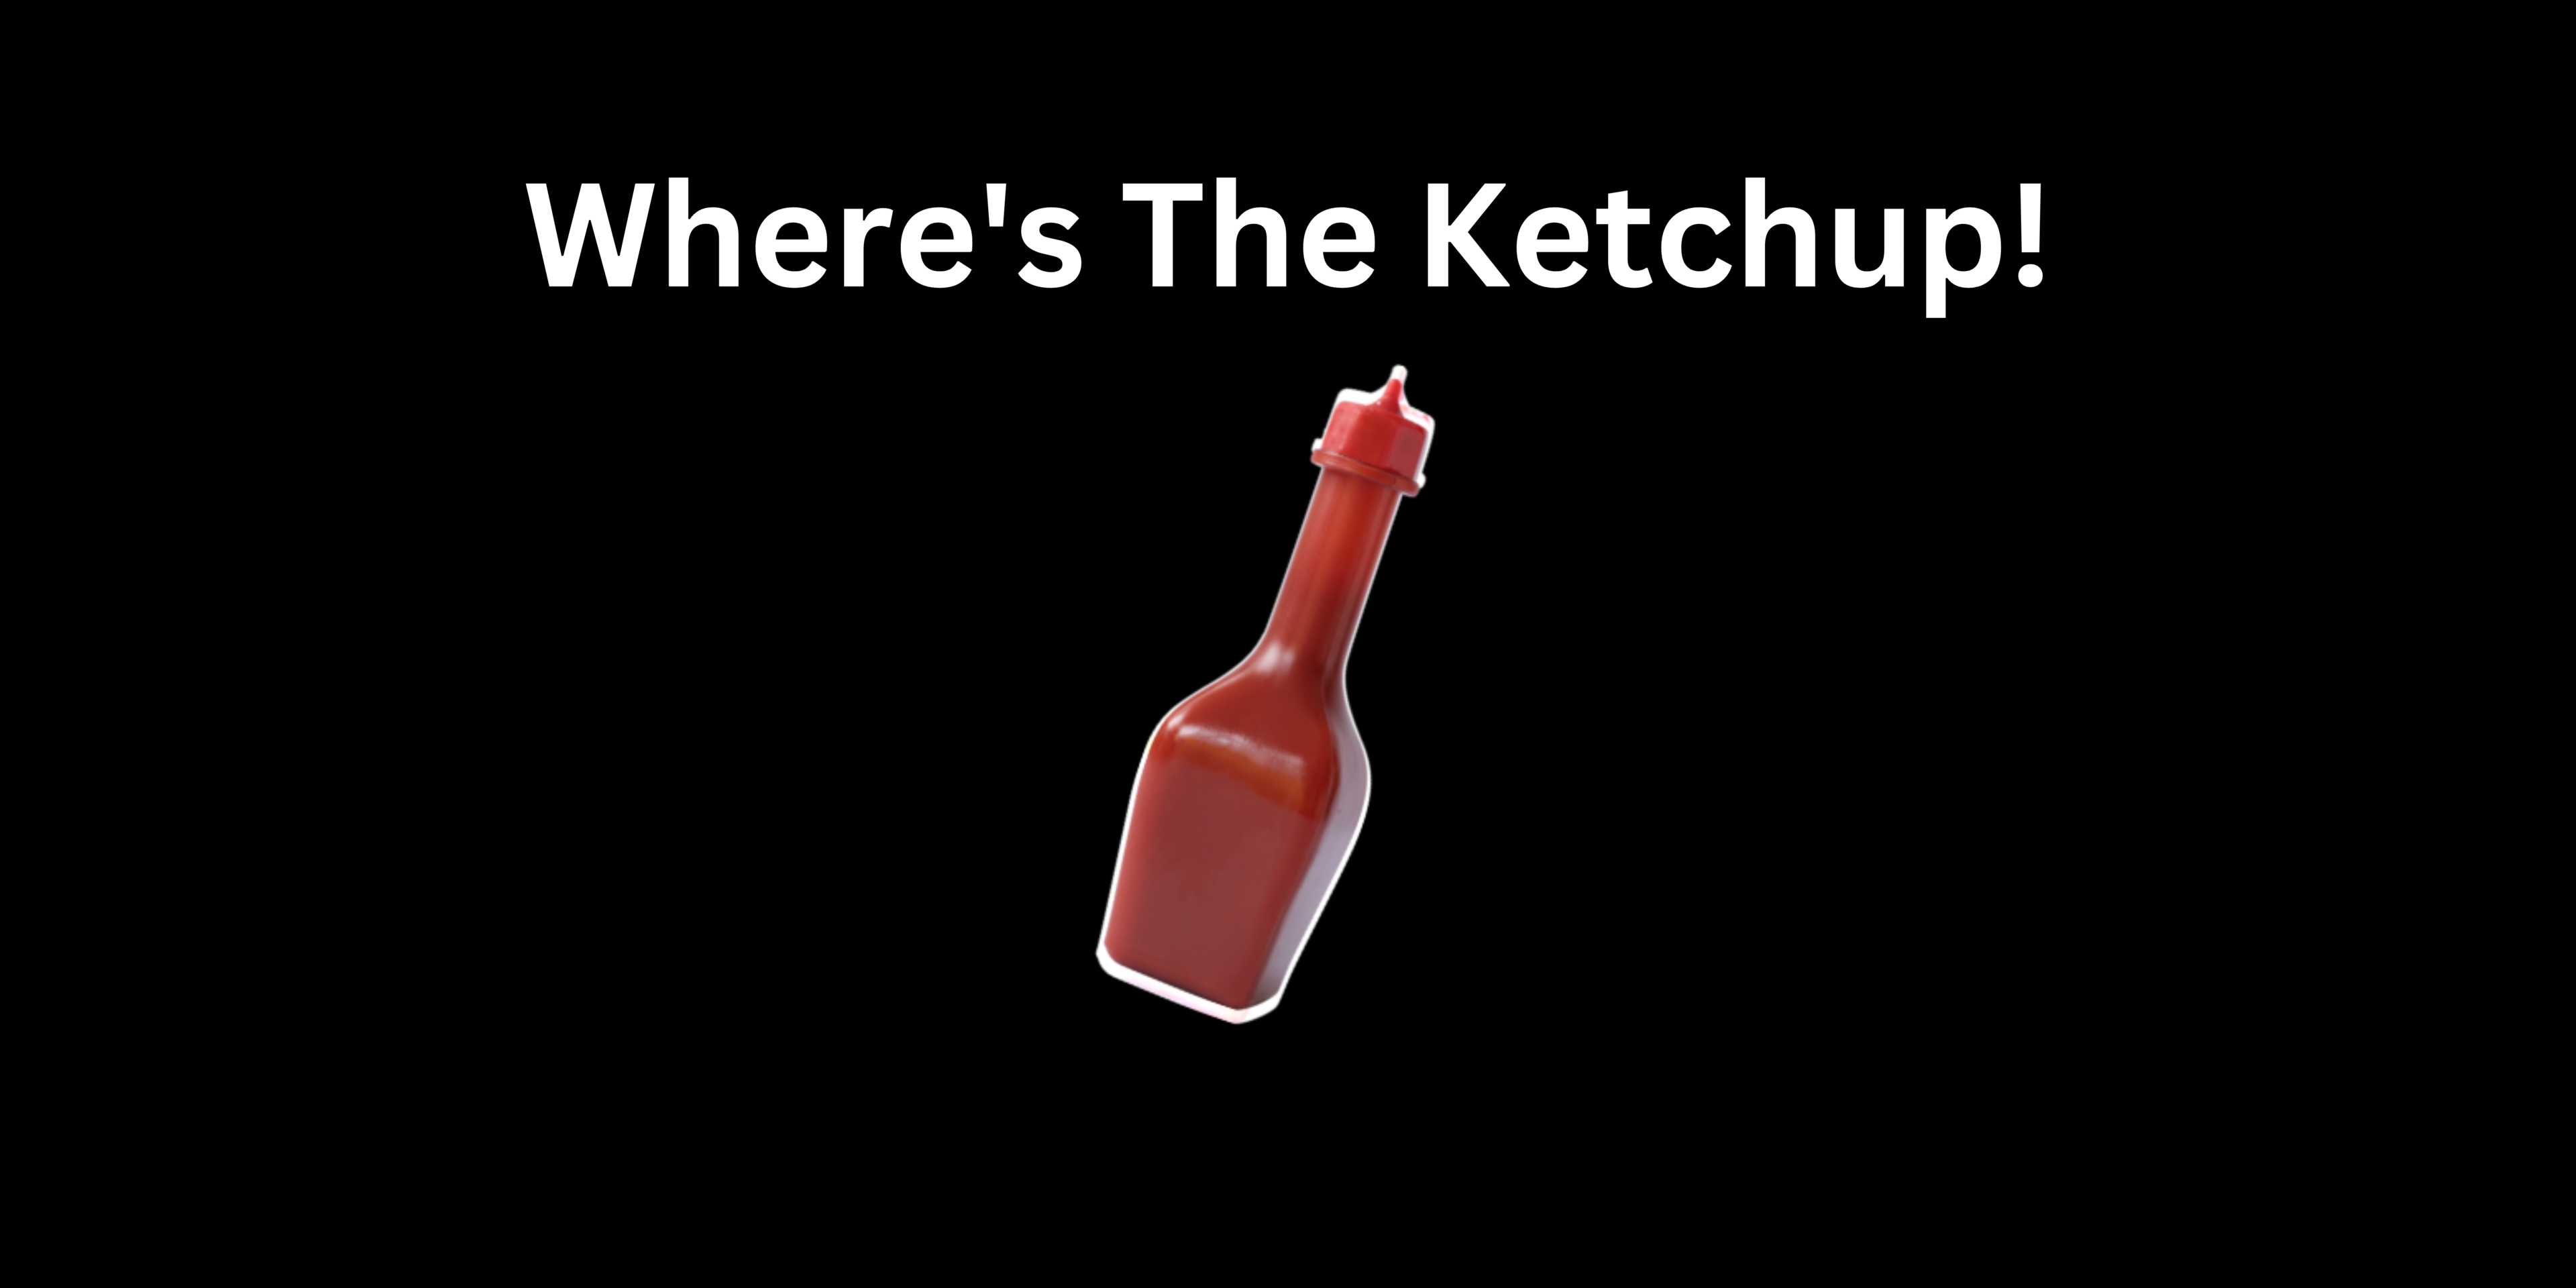 Where's The Ketchup!